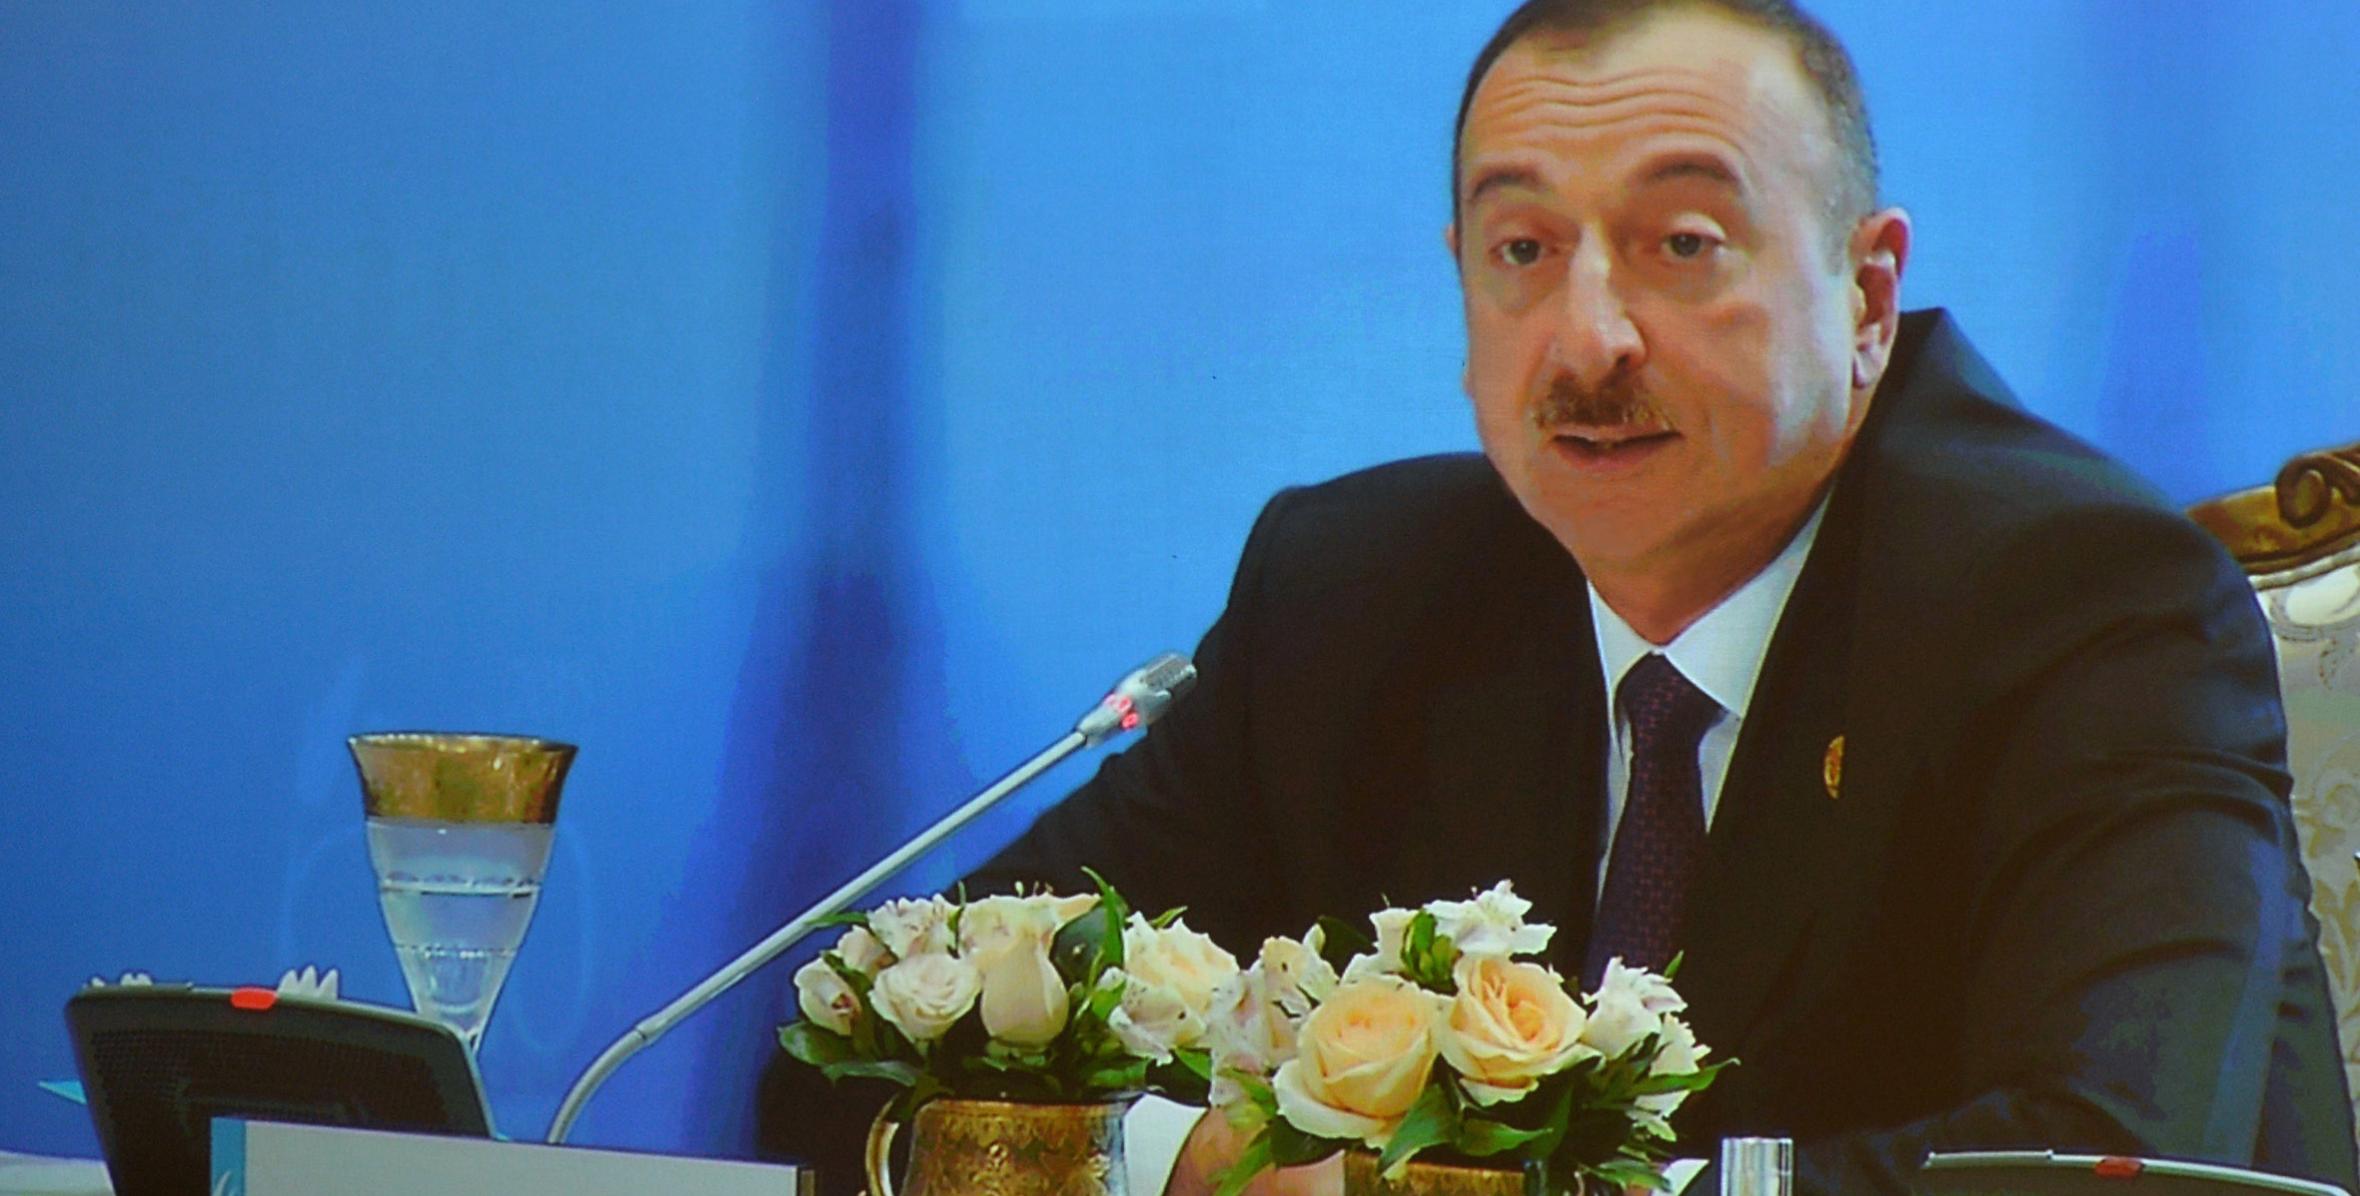 Ilham Aliyev addressed a working lunch as part of the G20 Antalya Summit